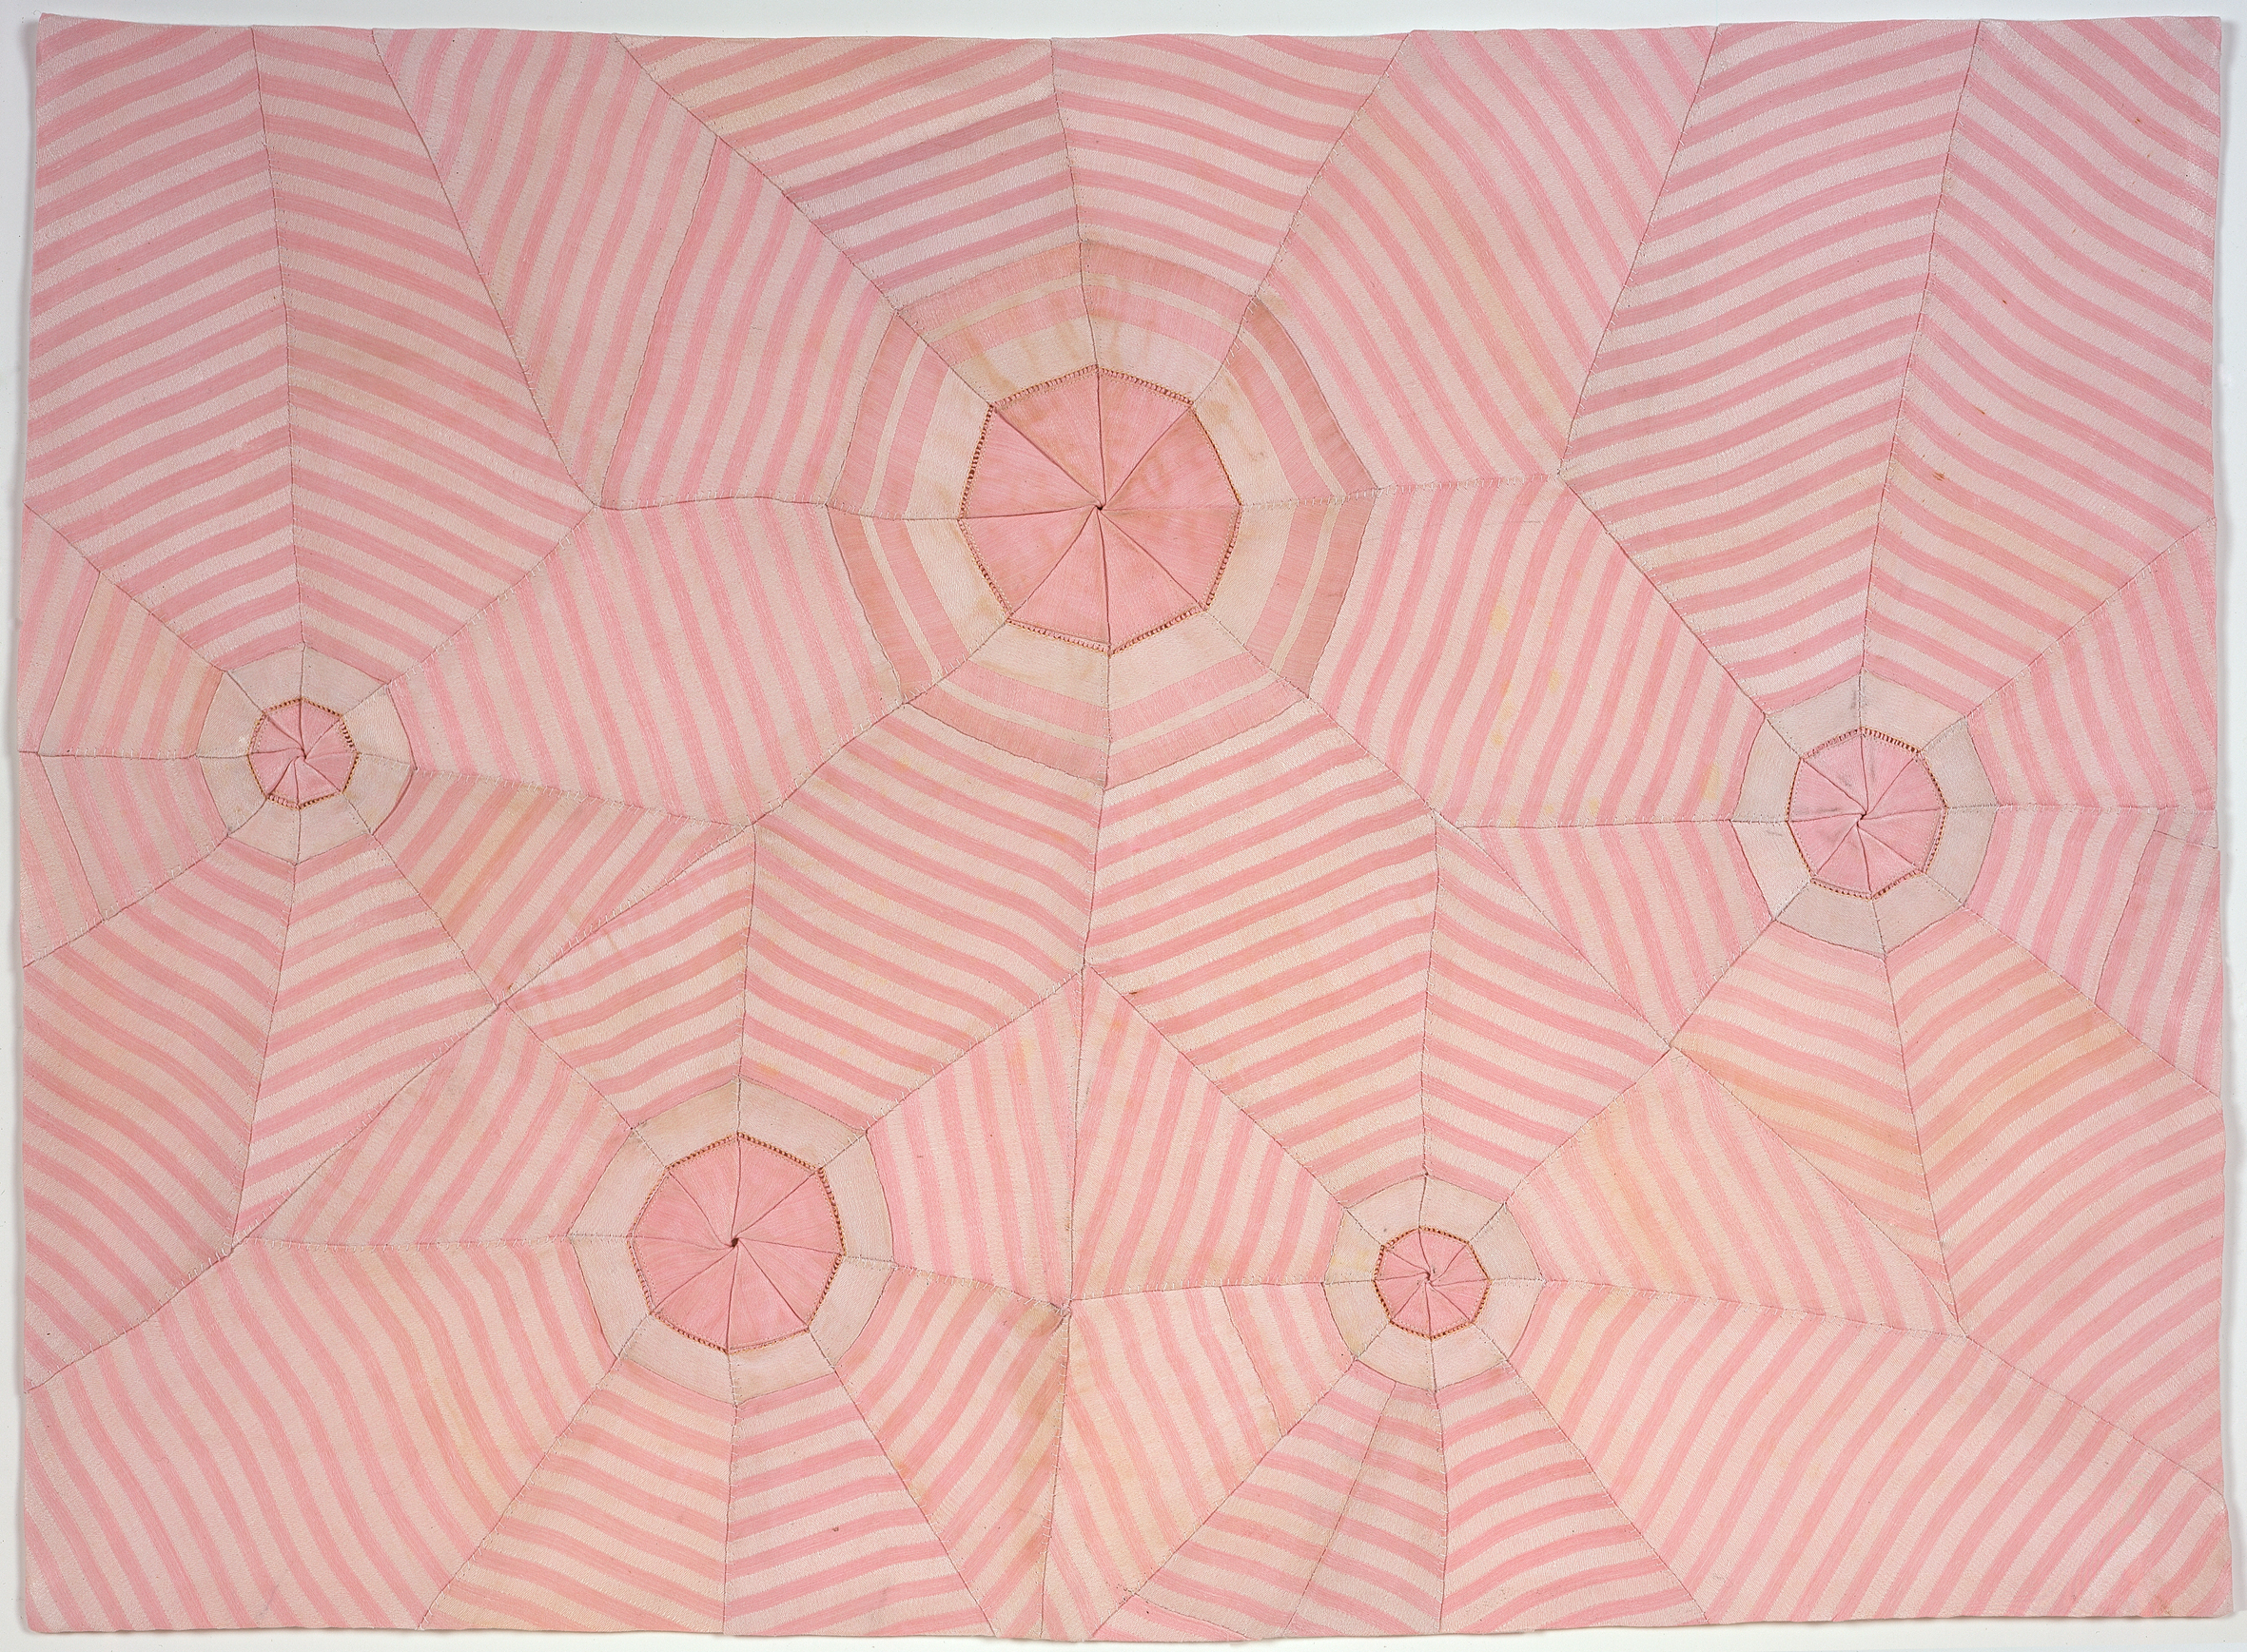 Louise Bourgeois' Potent Textile Works at the Gropius Bau